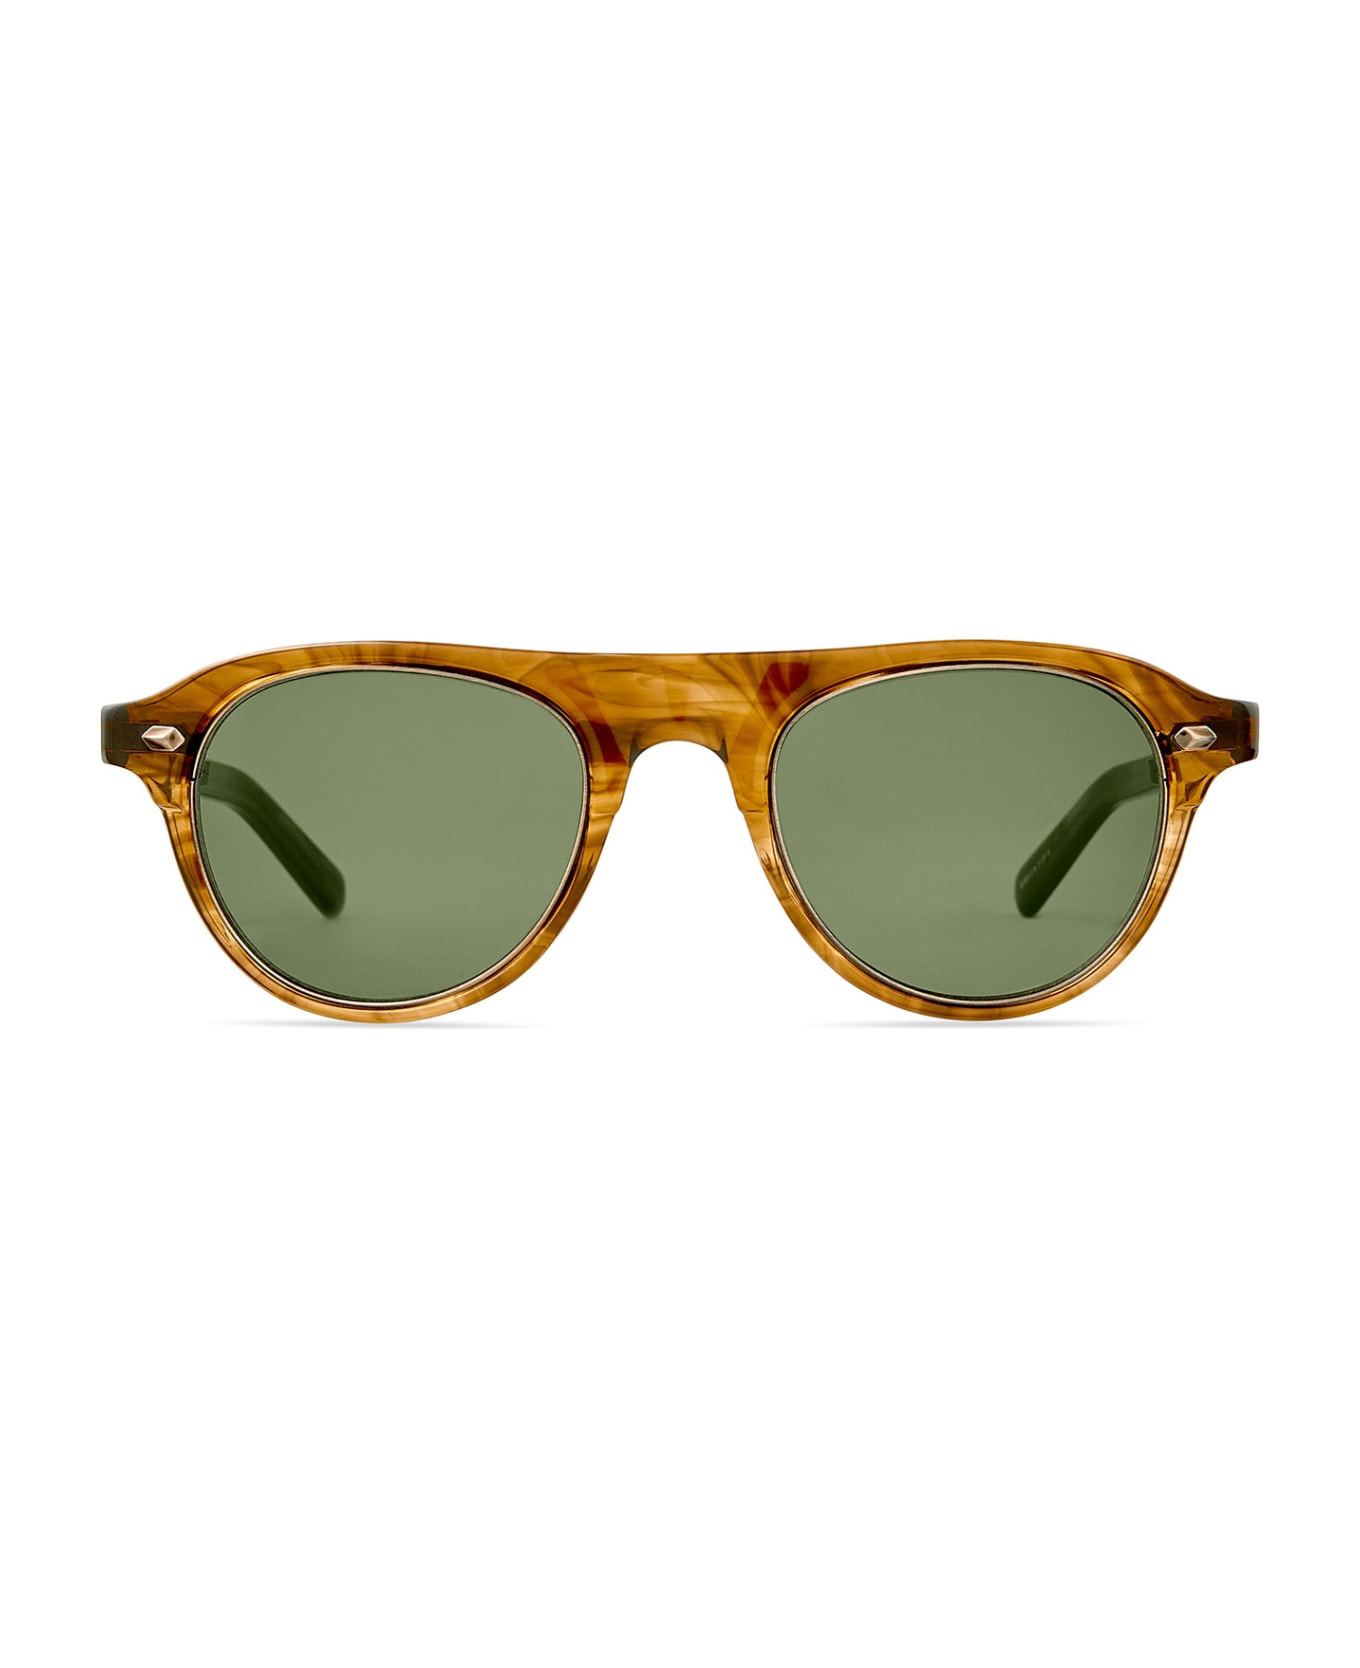 Mr. Leight Stahl S Marbled Rye-antique Gold/green Sunglasses - Marbled Rye-Antique Gold/Green